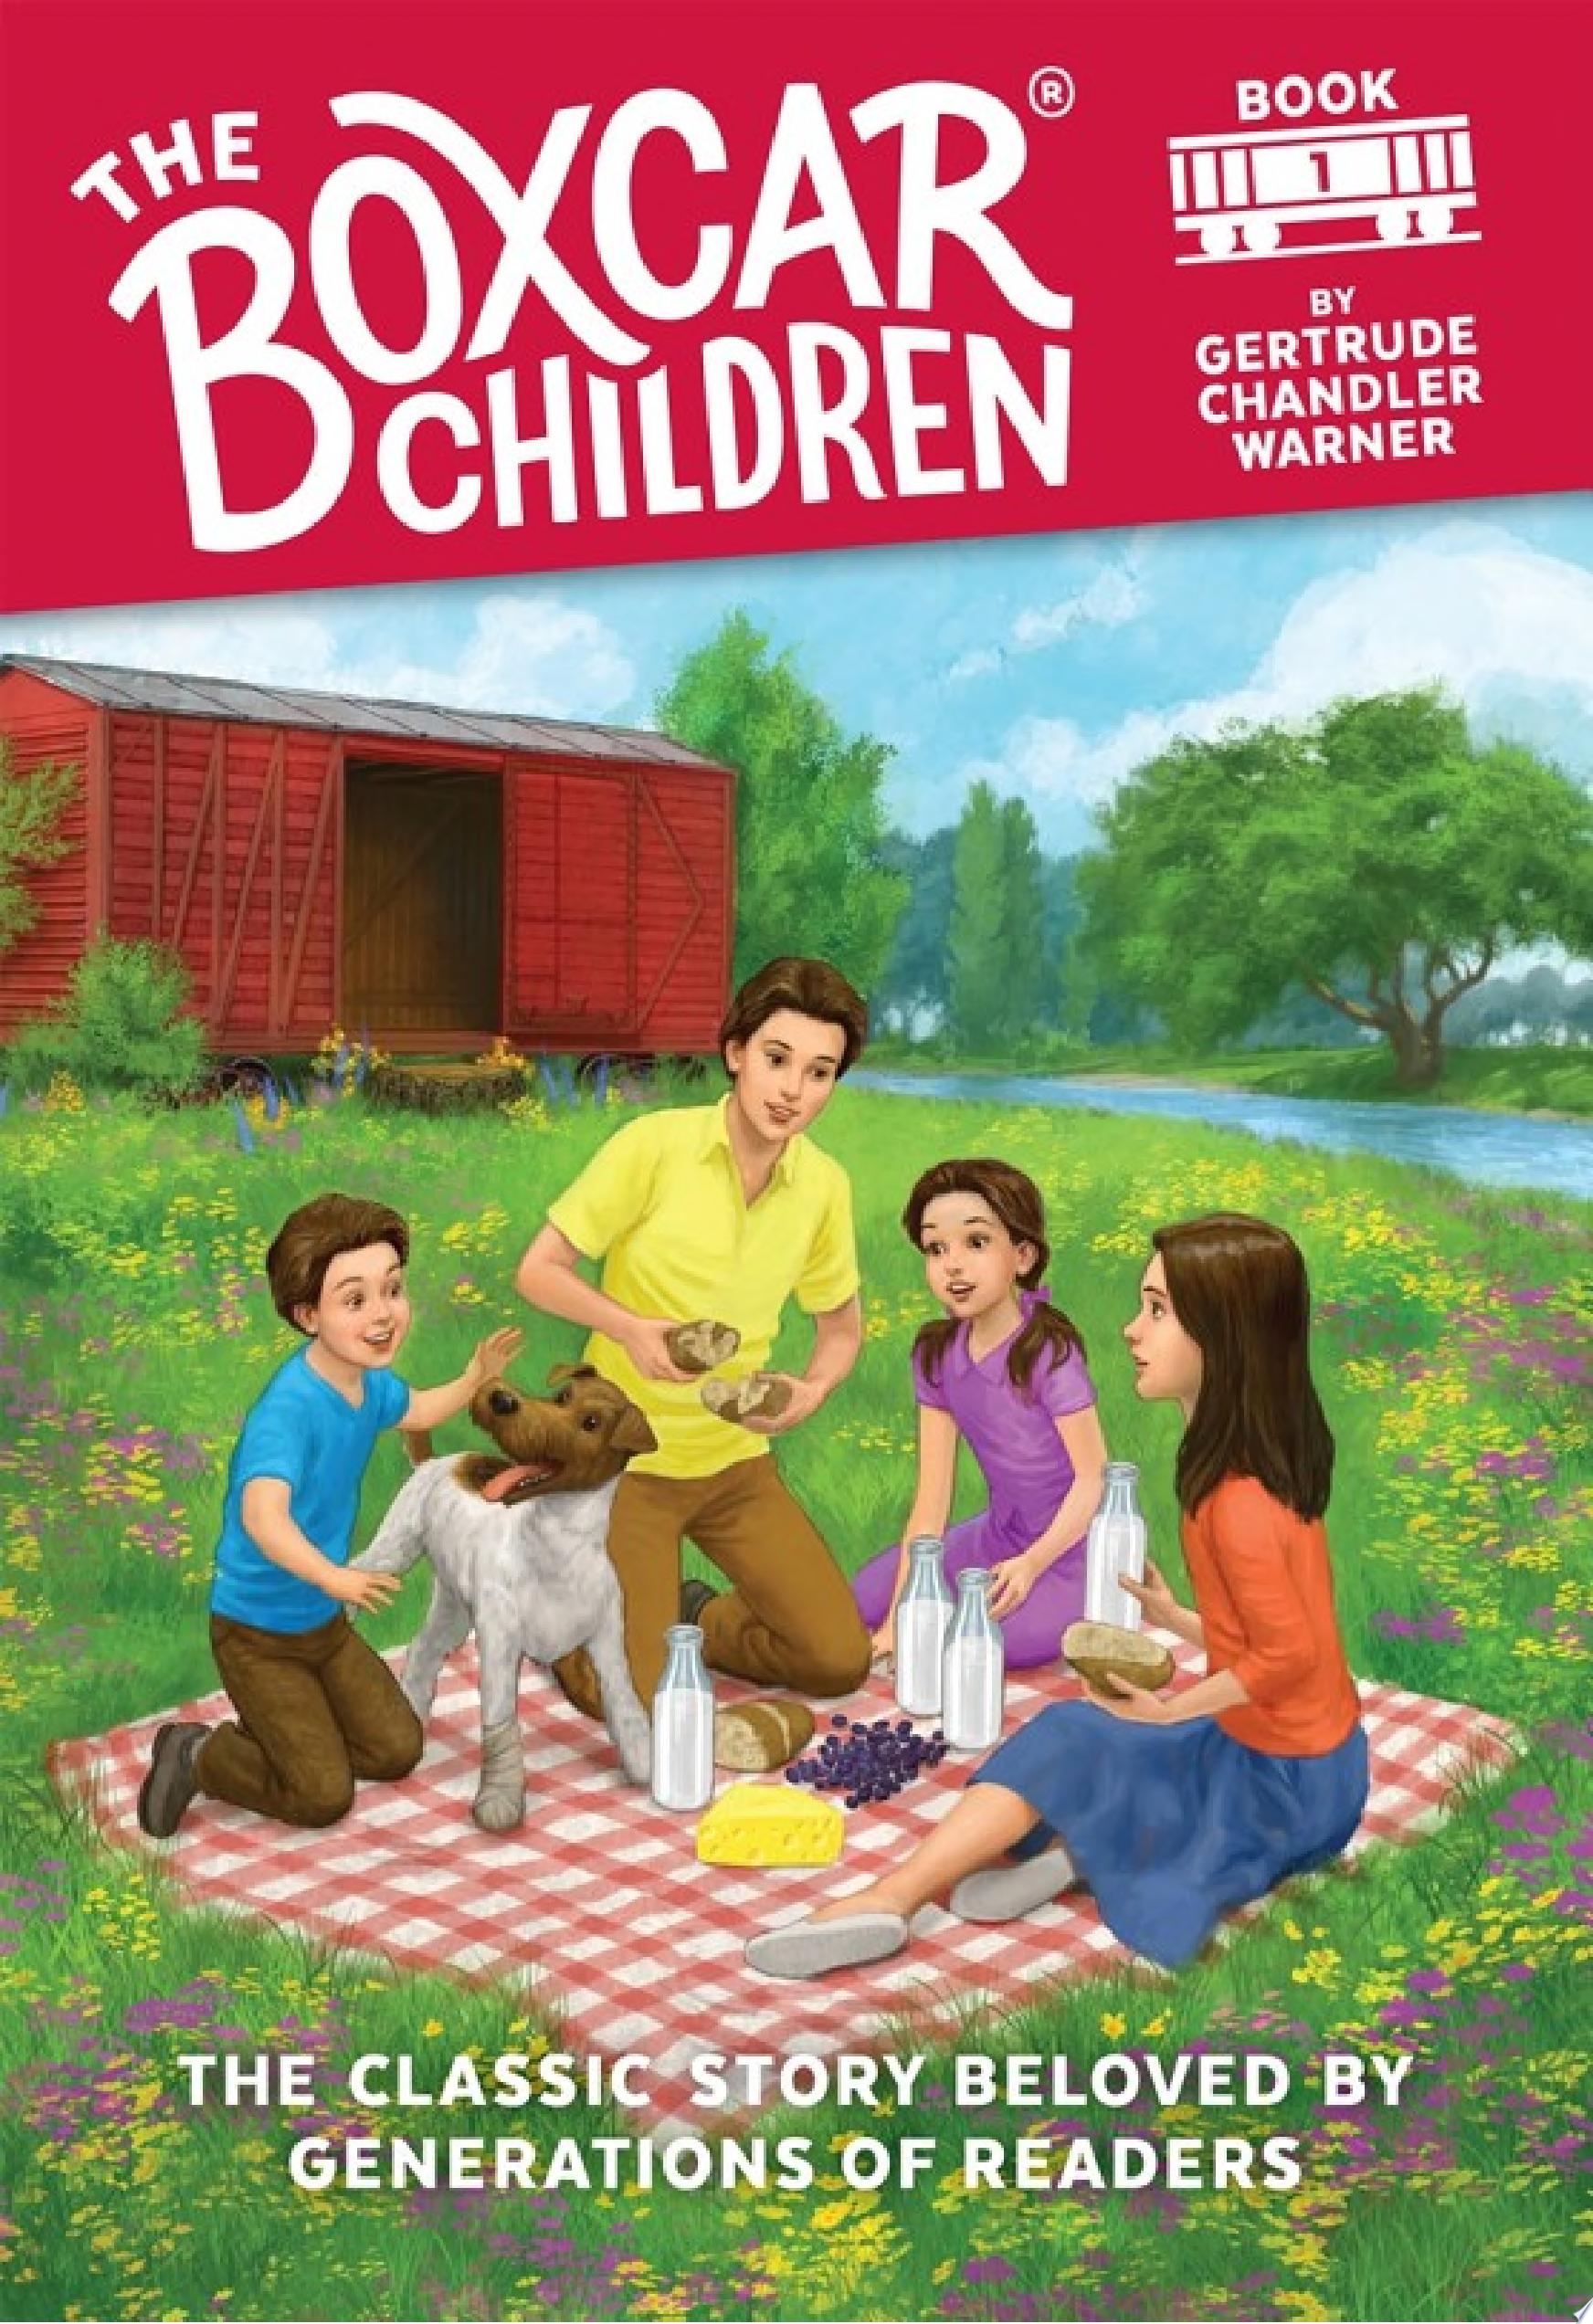 Image for "The Boxcar Children"